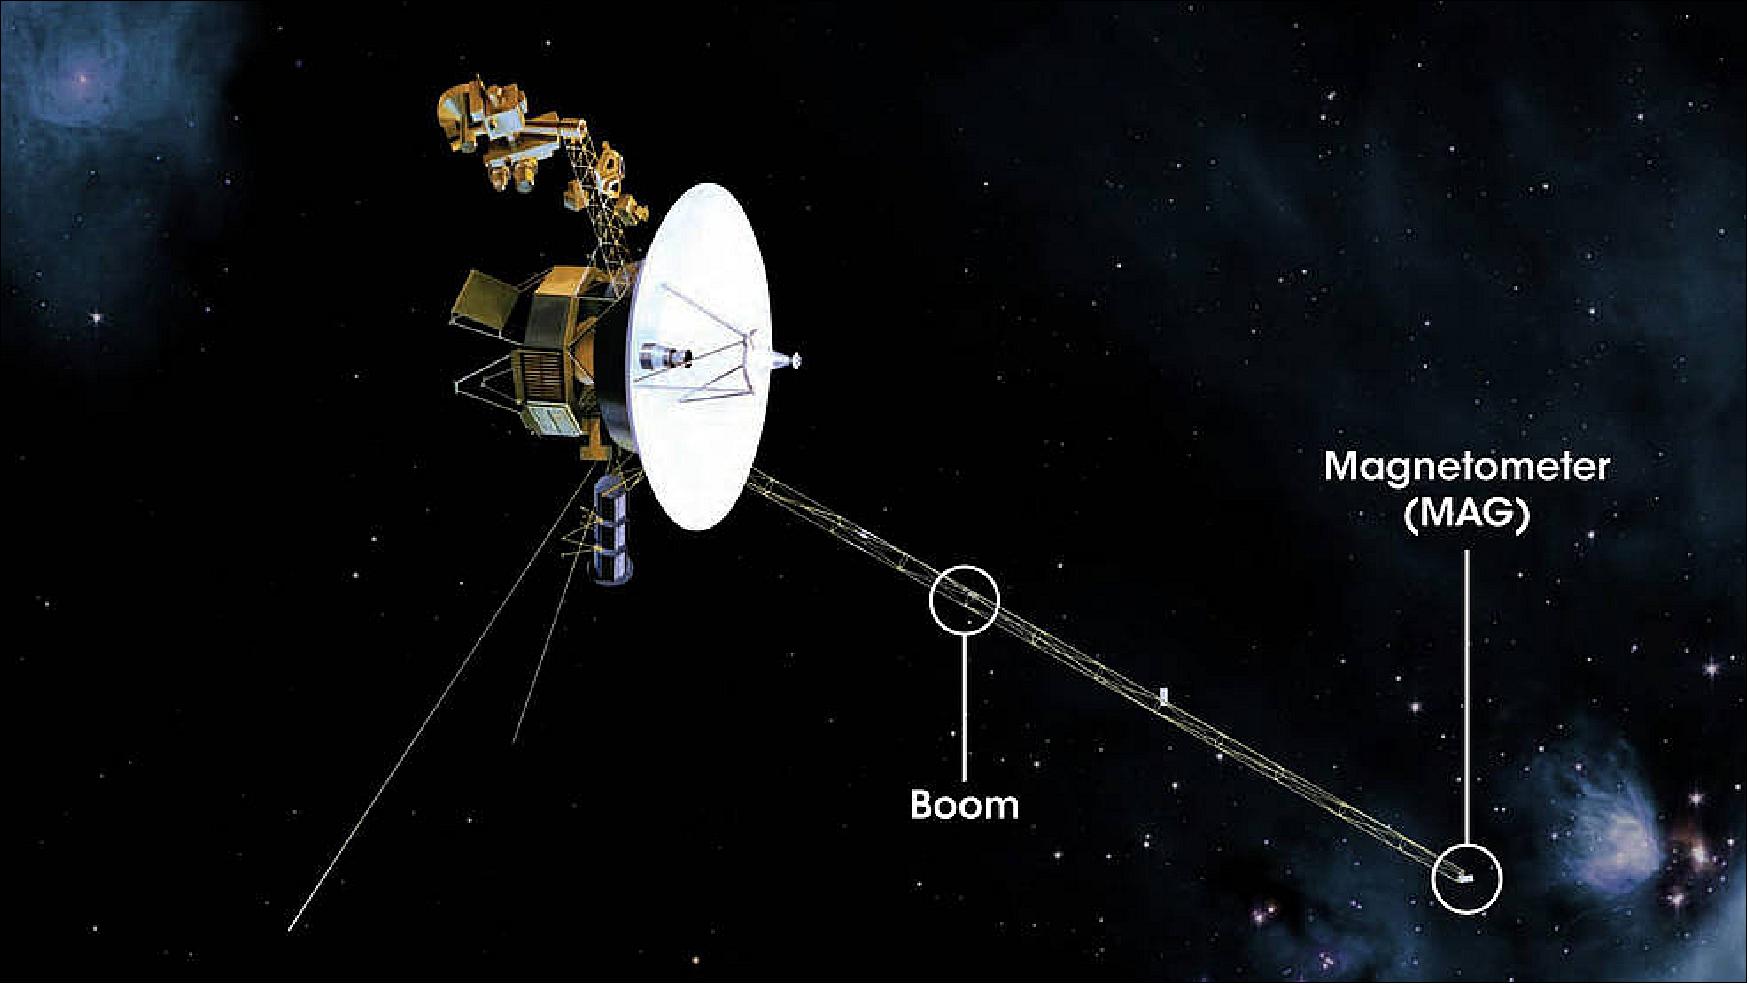 Figure 14: Illustration of NASA’s Voyager spacecraft, with the Magnetometer (MAG) instrument and its boom displayed (image credit: NASA’s Goddard Space Flight Center/Jet Propulsion Laboratory/Mary Pat Hrybyk-Keith)